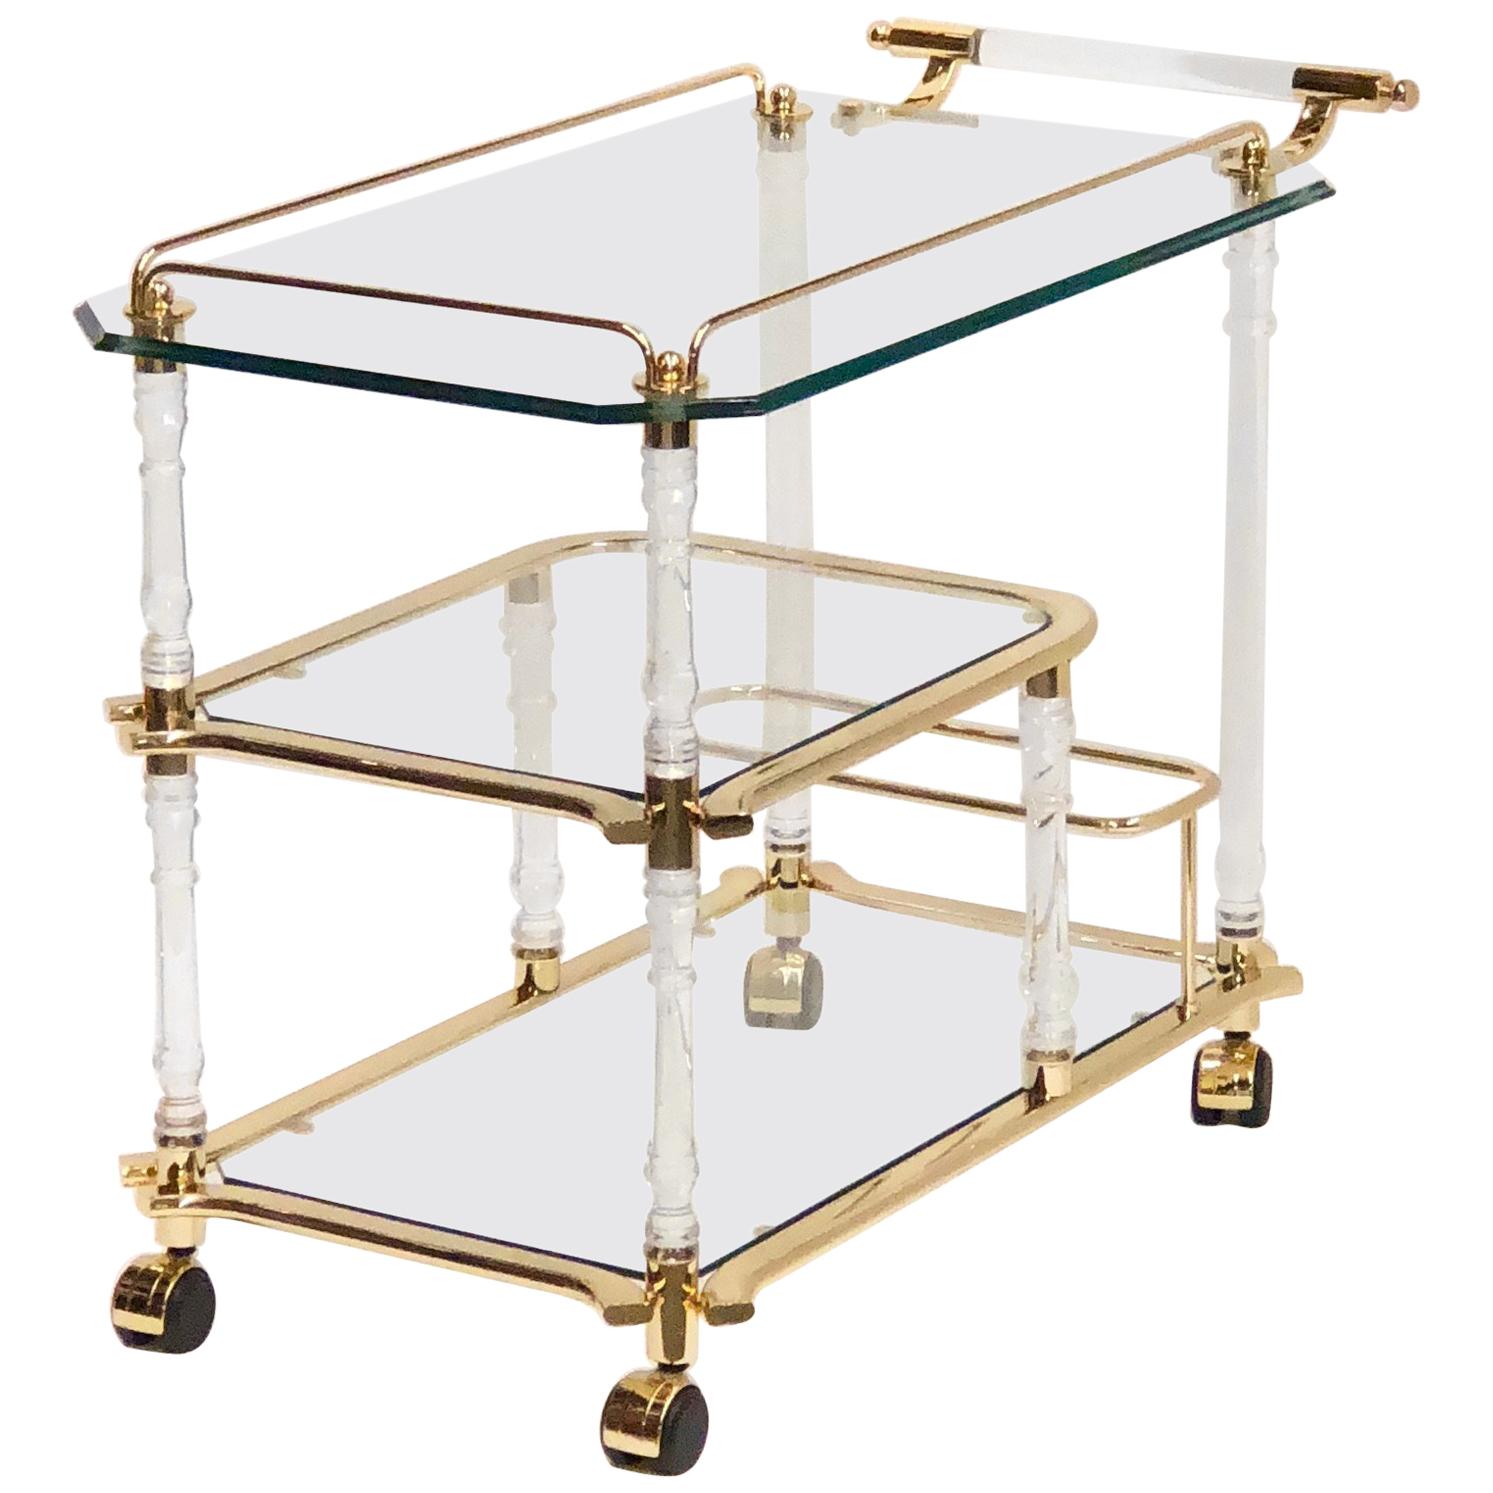 Stunning 1980s Bar Cart, Tea Trolley or Drinks Stand in Brass, Glass and Lucite